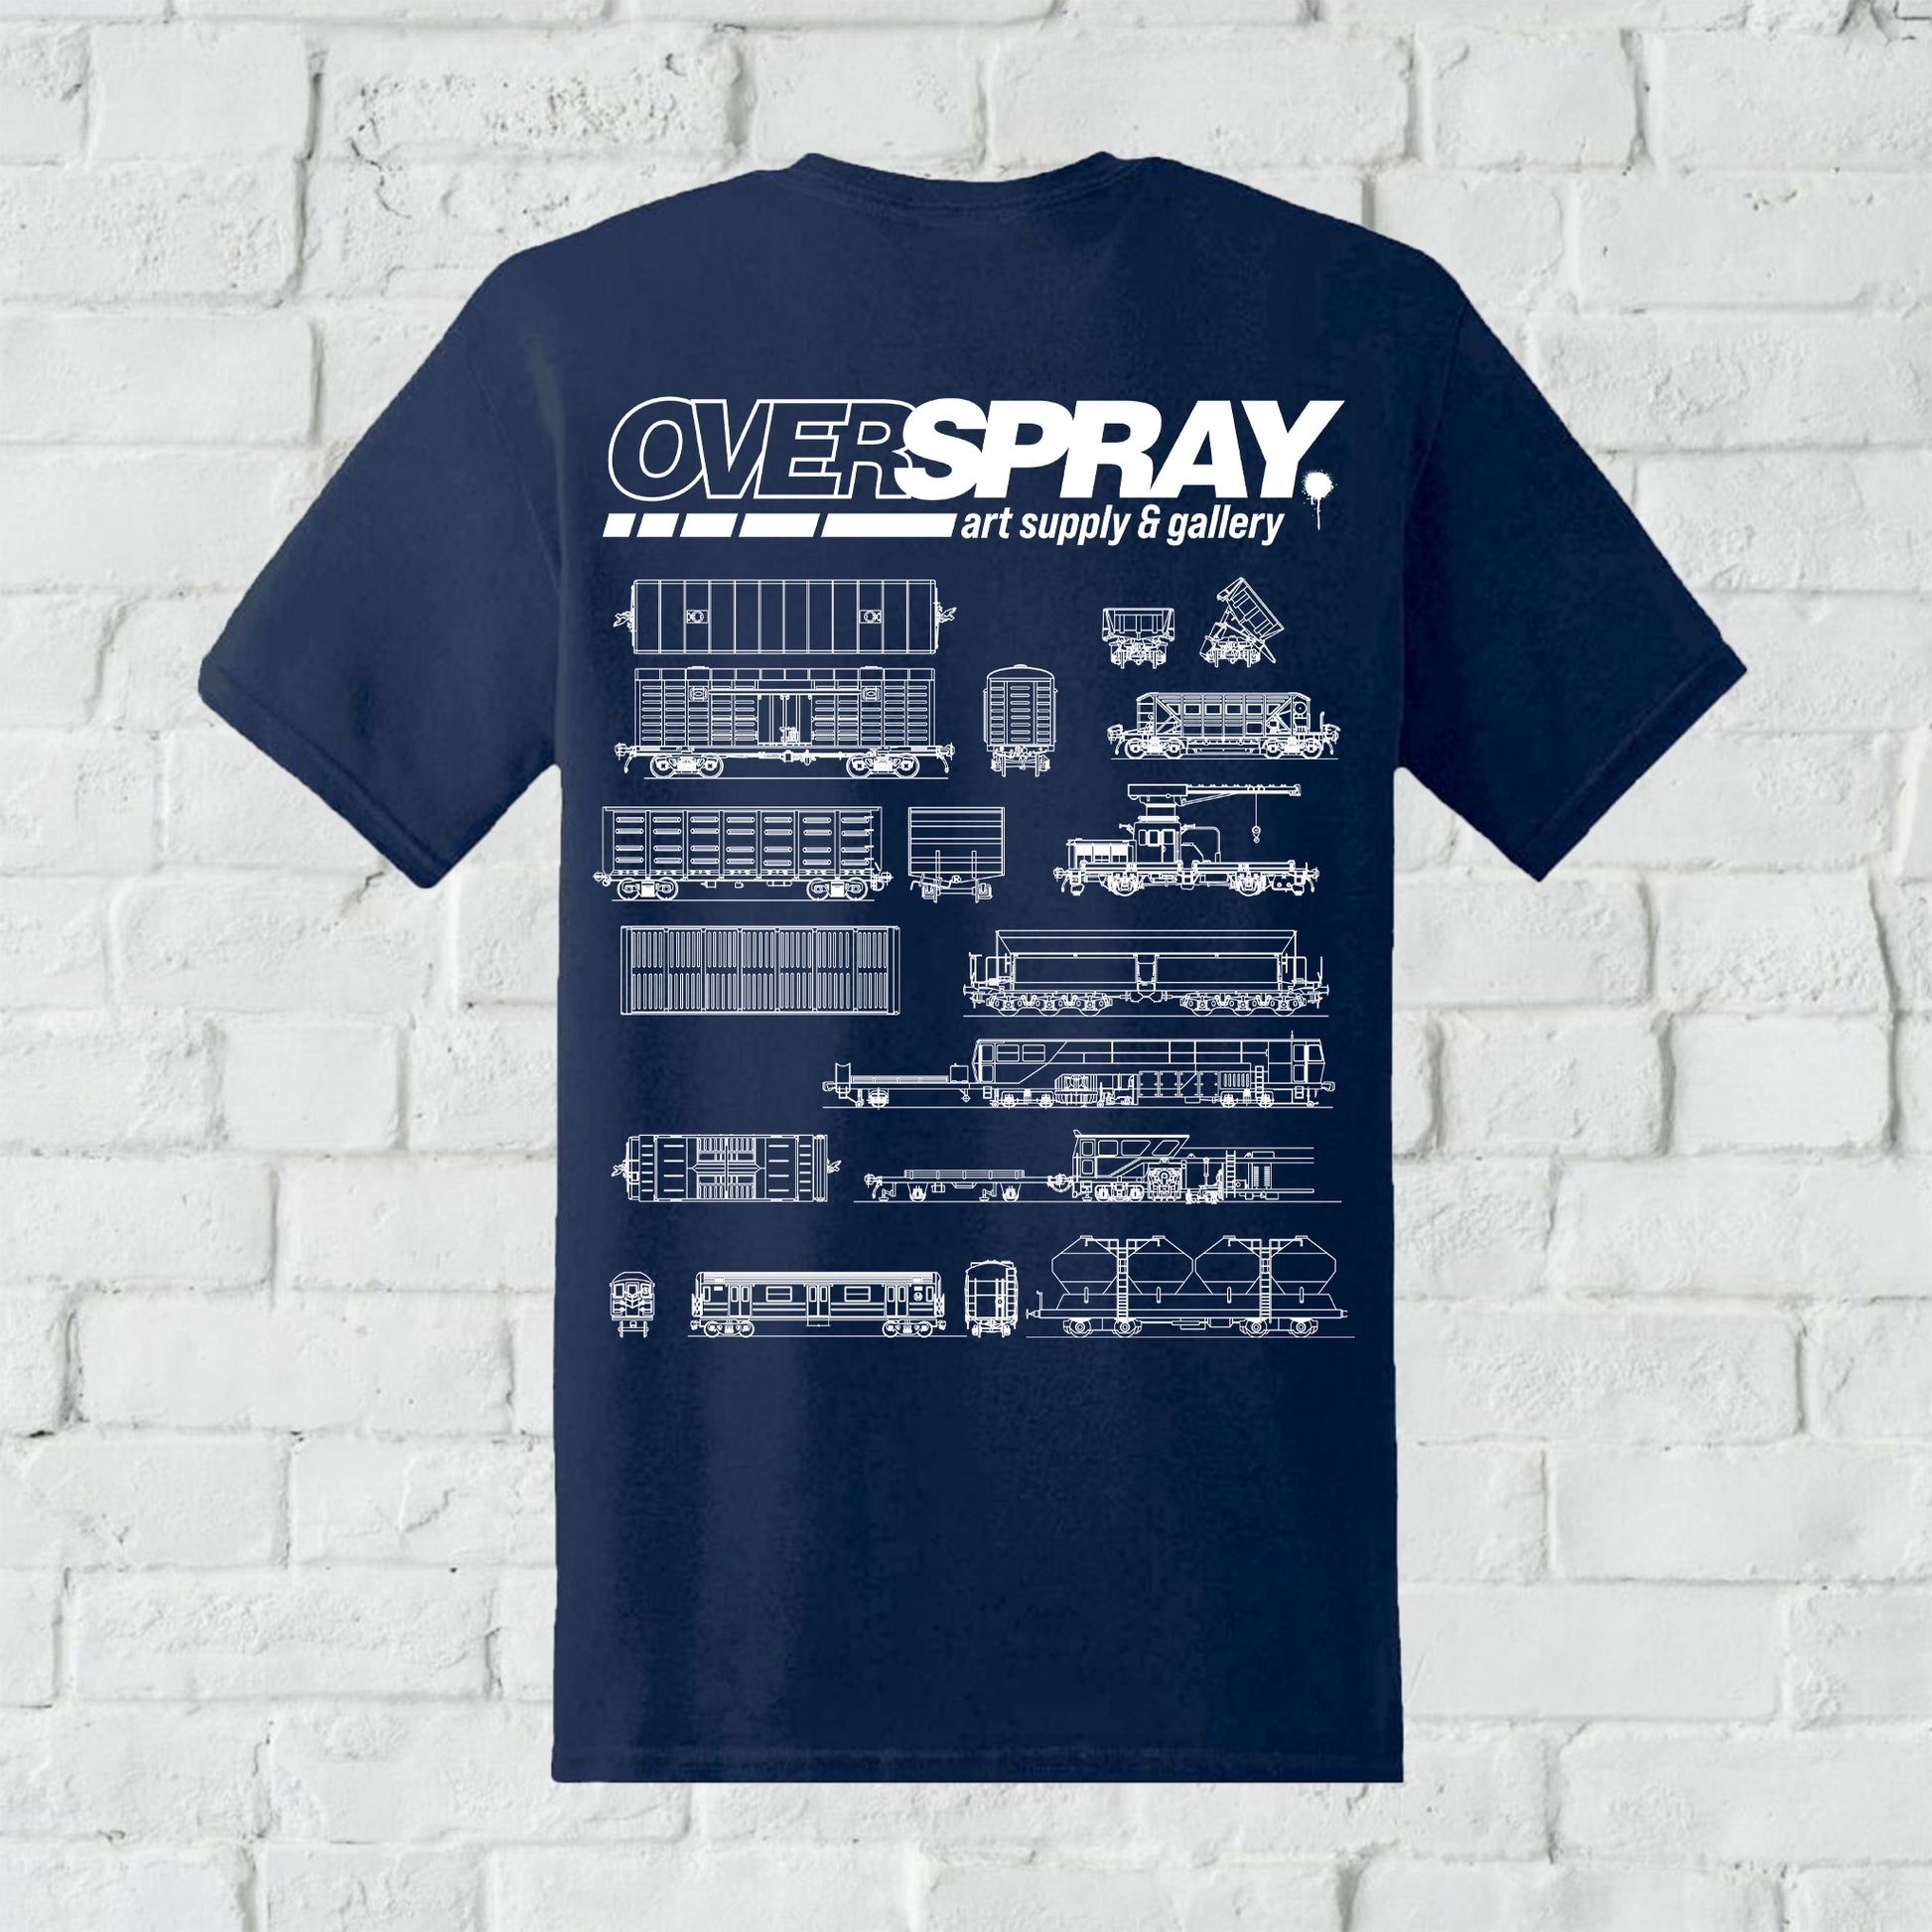 The back of a blue shirt with "overspray" and train illustrations in white print